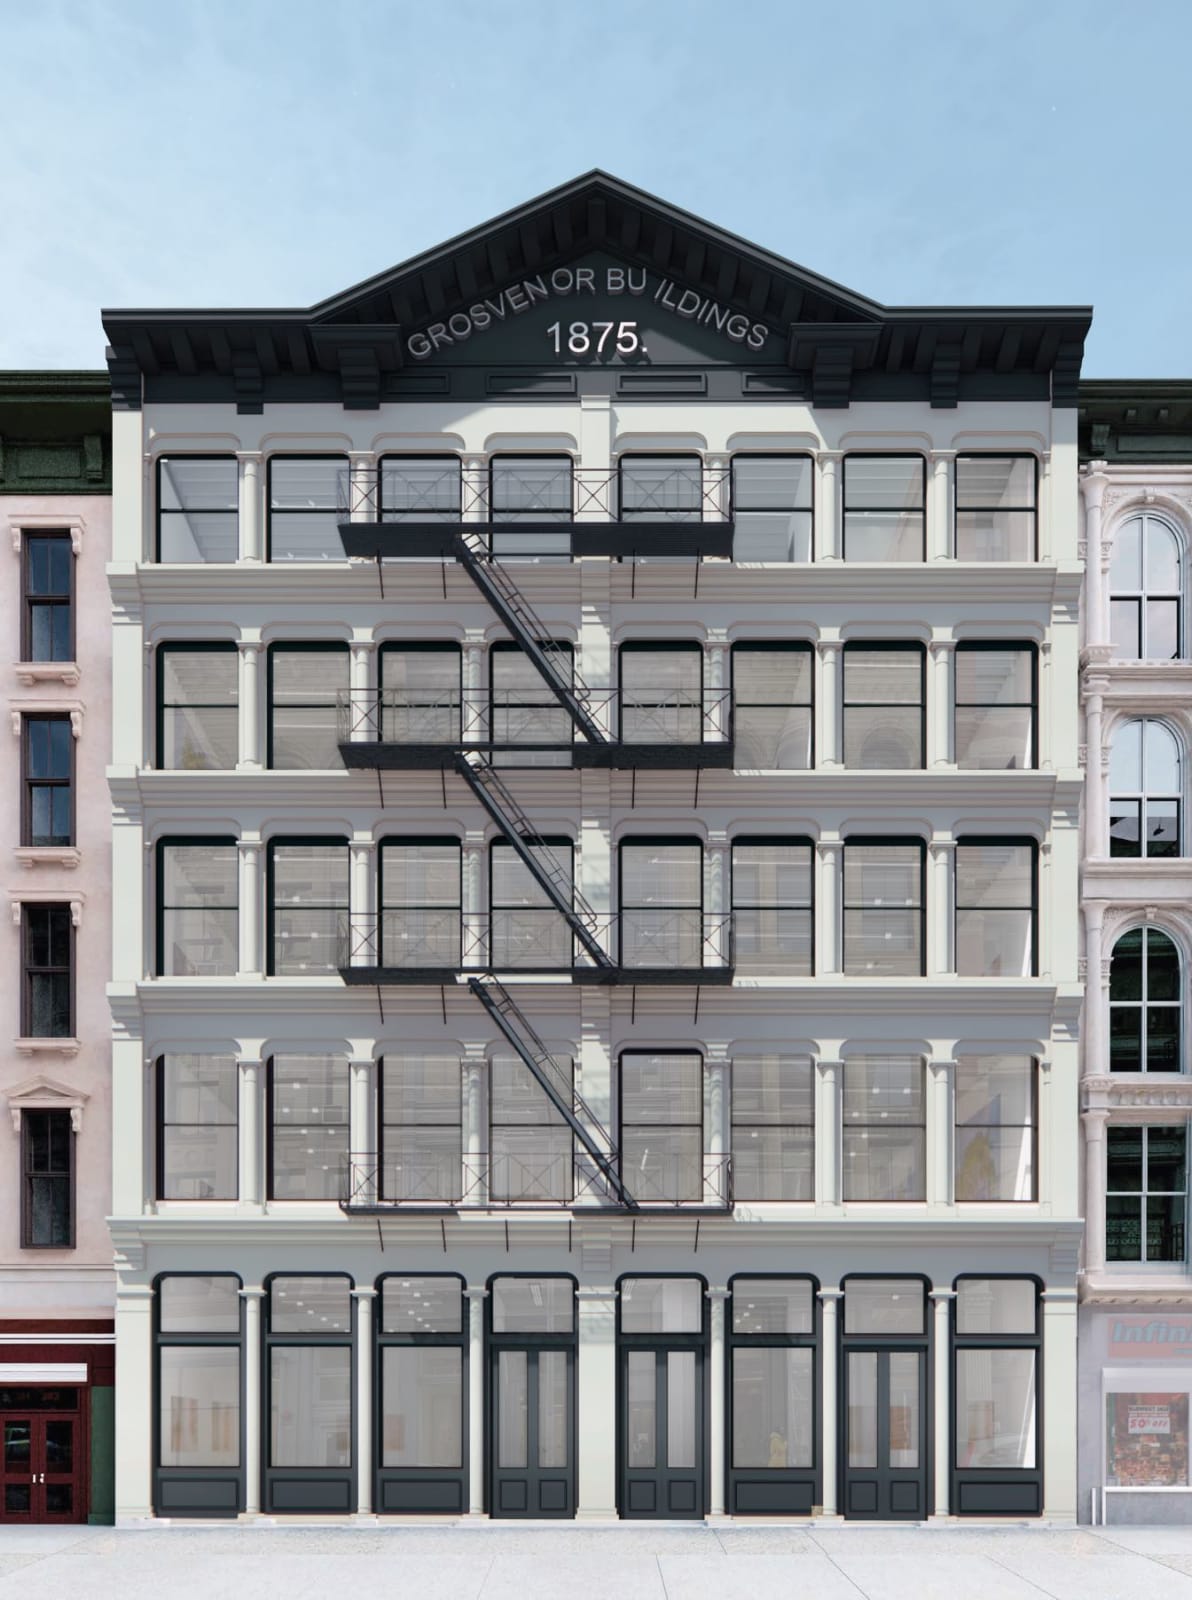 Rendering of Marian Goodman Gallery’s new home at 385 Broadway in Tribeca. Image courtesy of studioMDA.